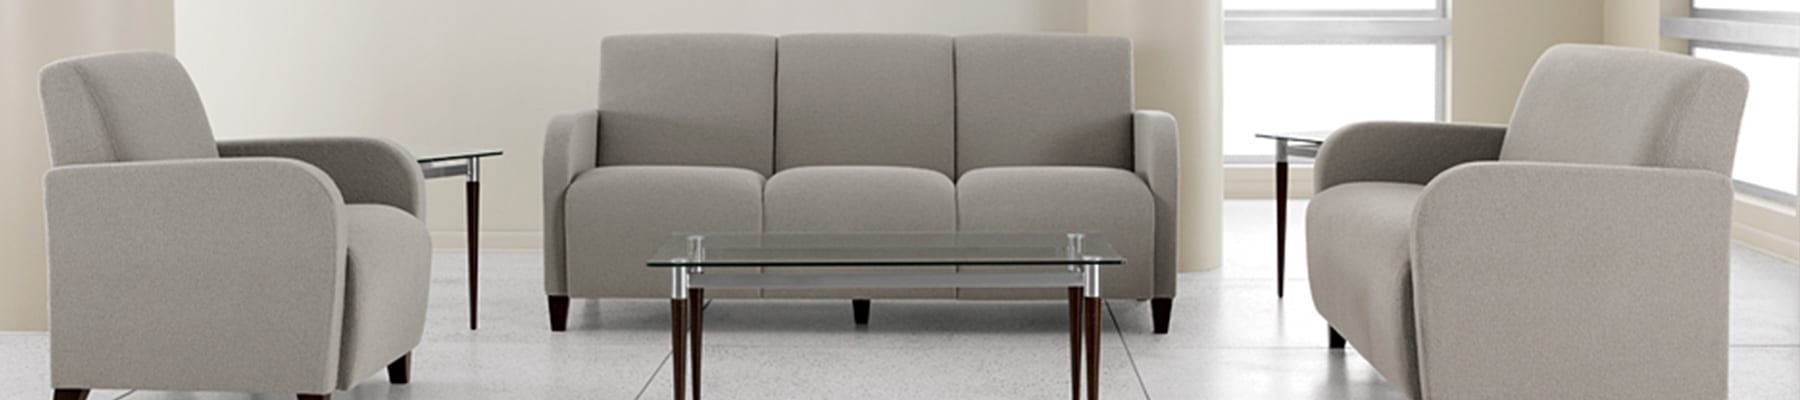 medical office guest seating furniture